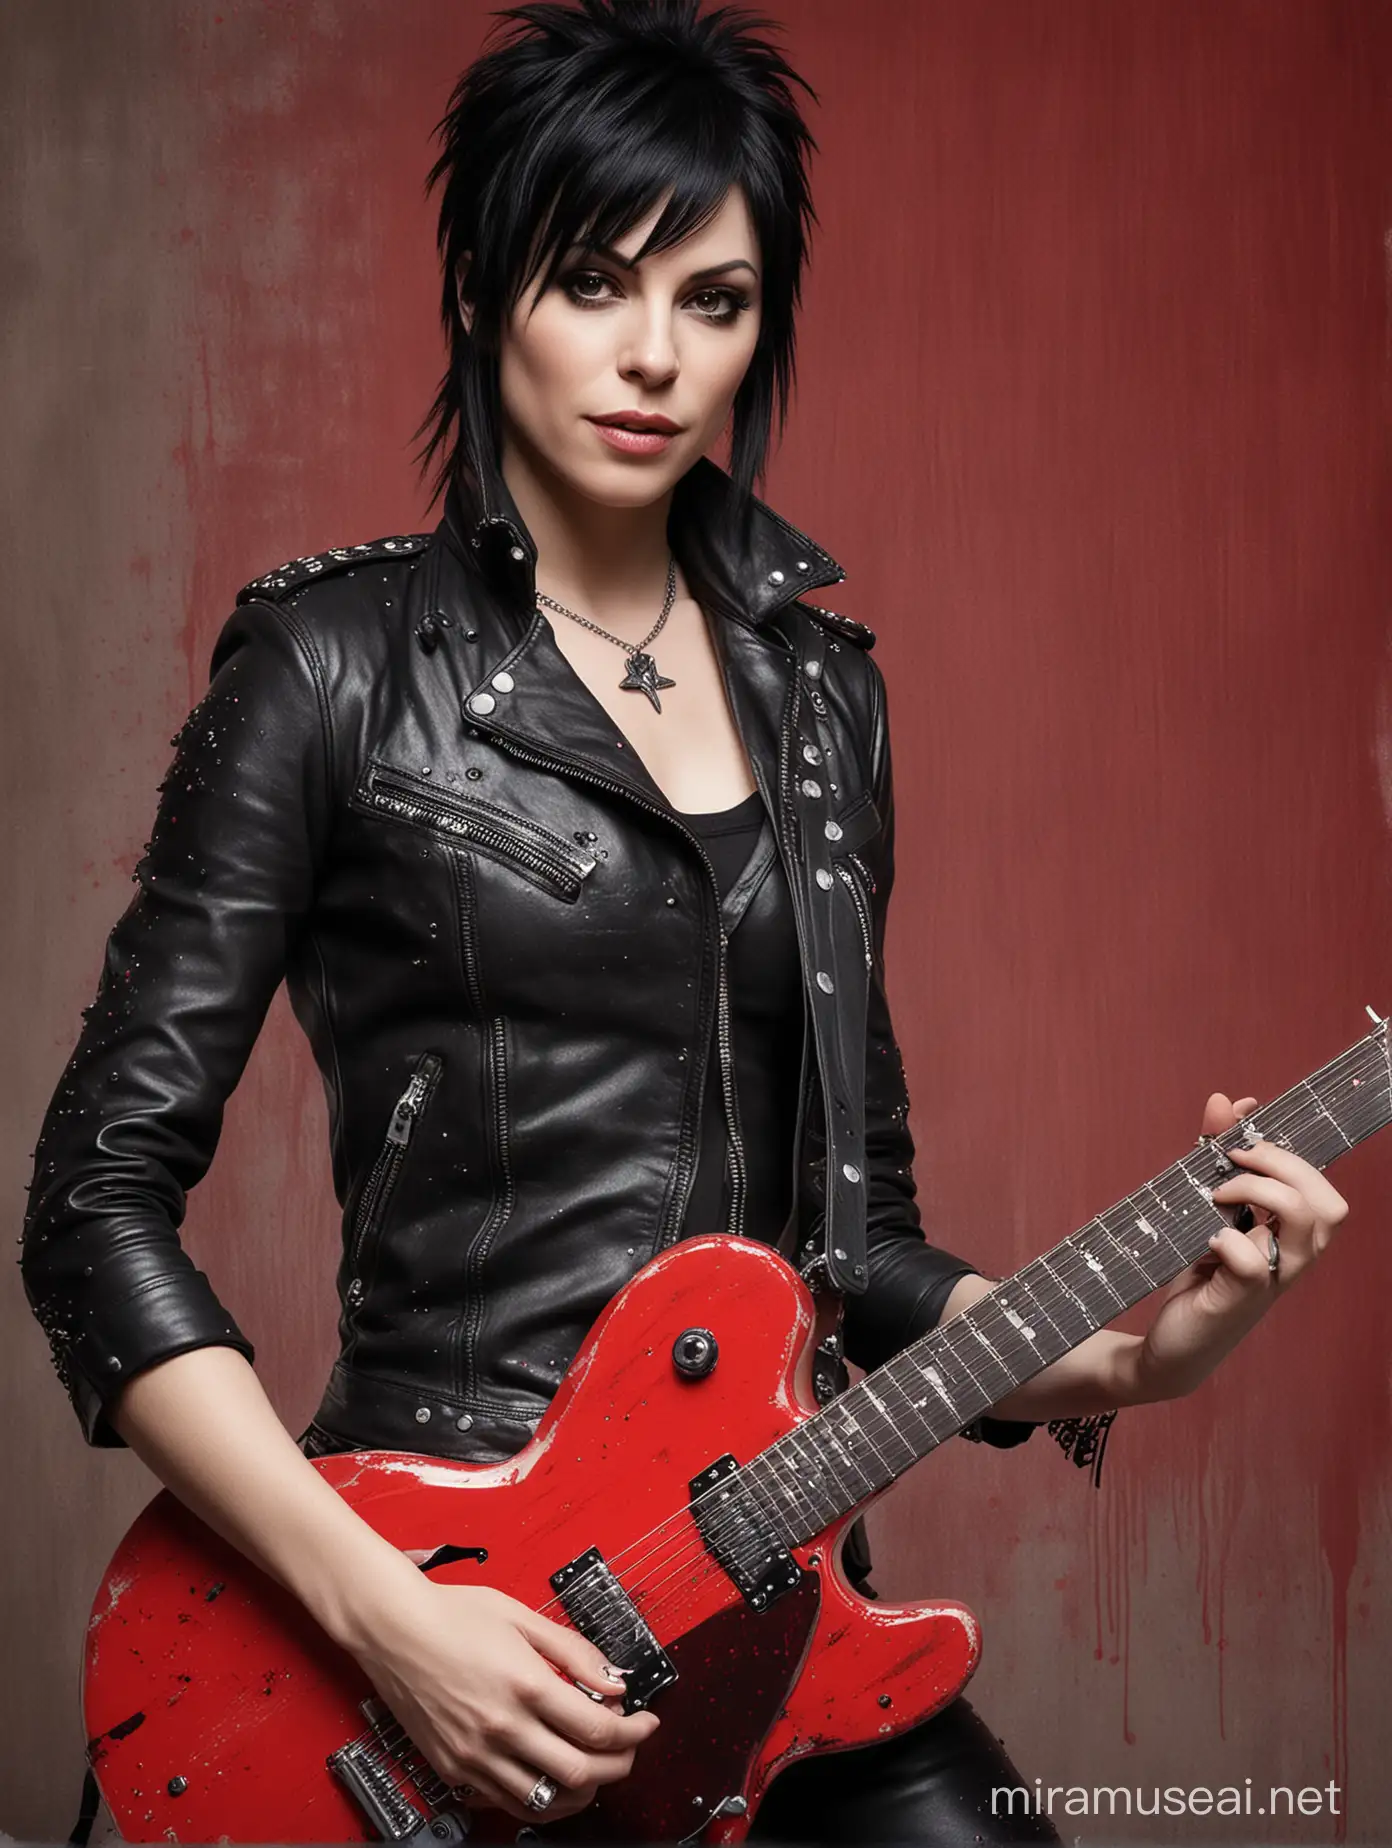 Photorealistic Female Guitarist Joan Jett Rocking Out in Attractive Rocker Costume on White Background with Red Paint Spots